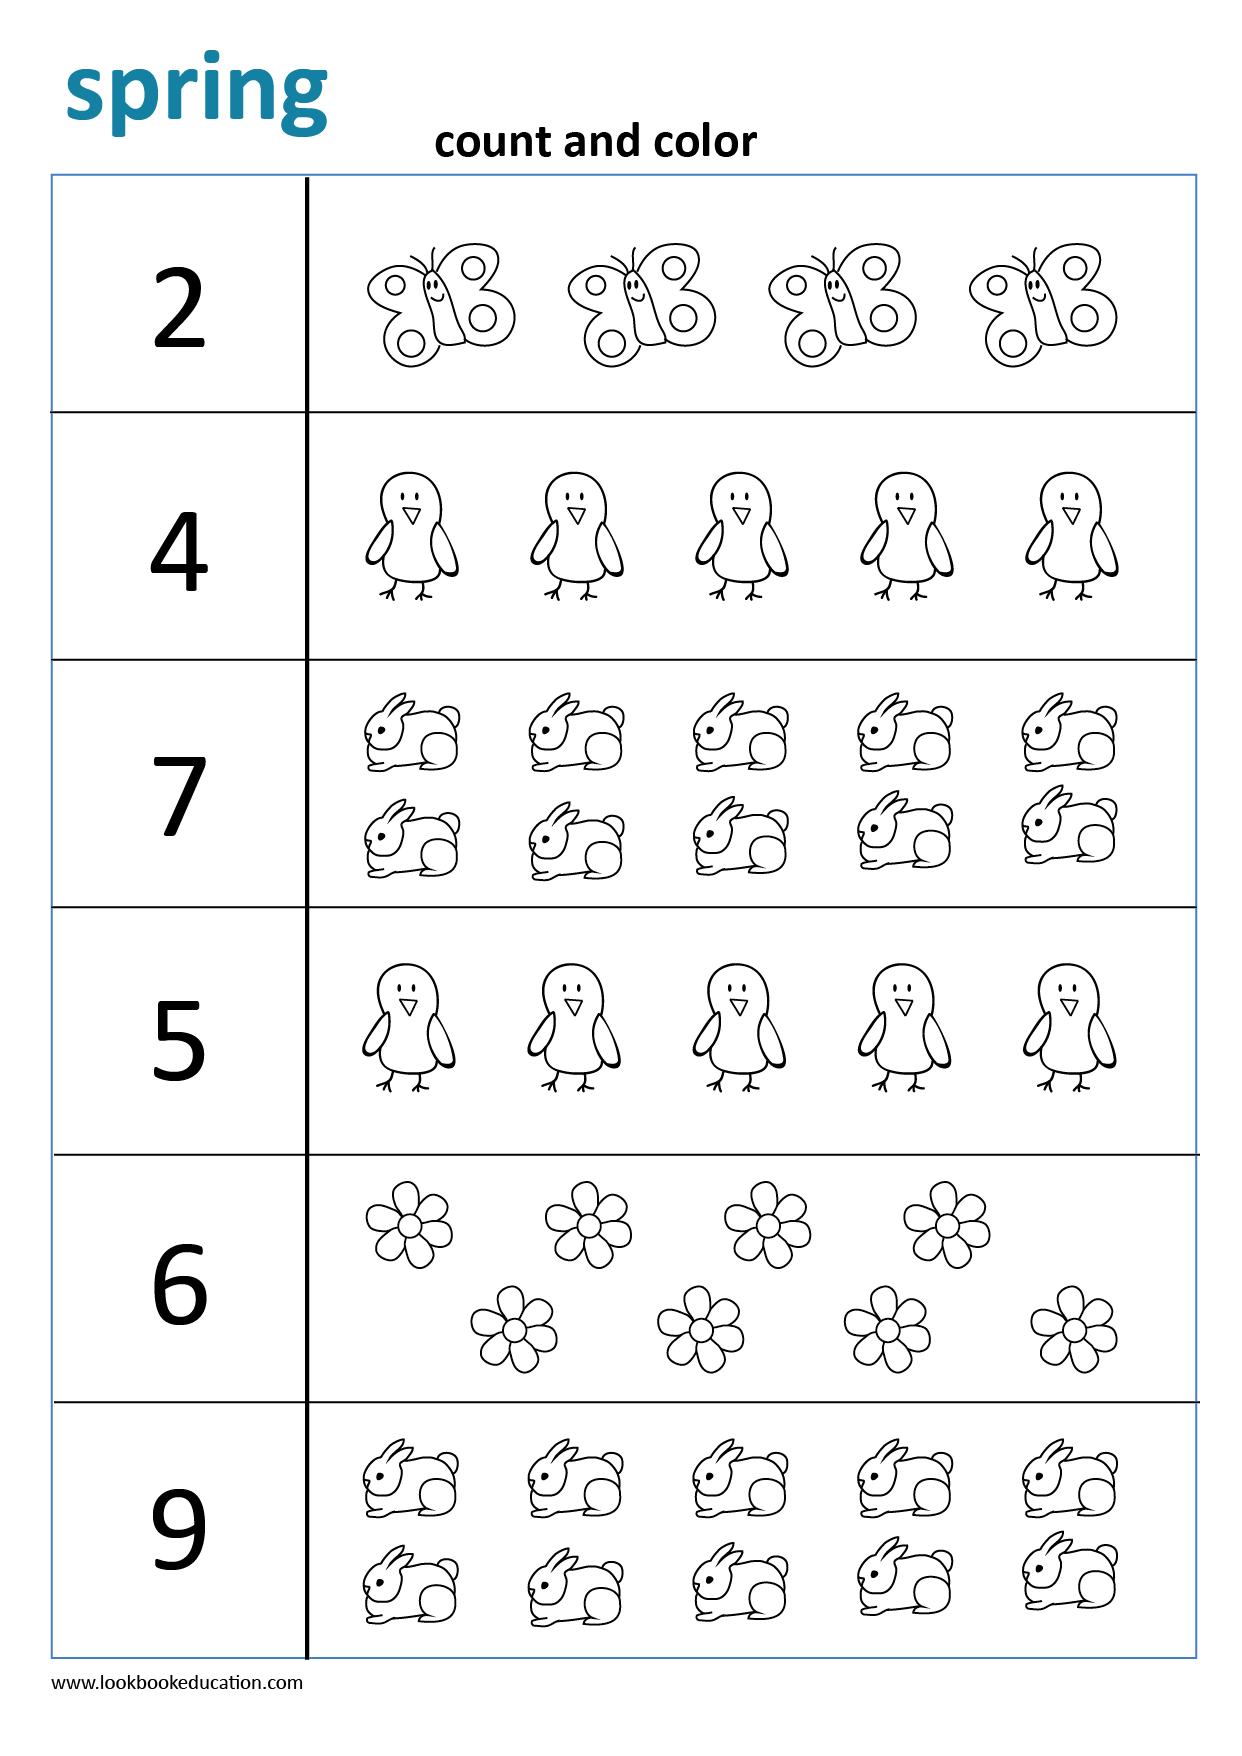 worksheet count and color spring lookbookeducationcom